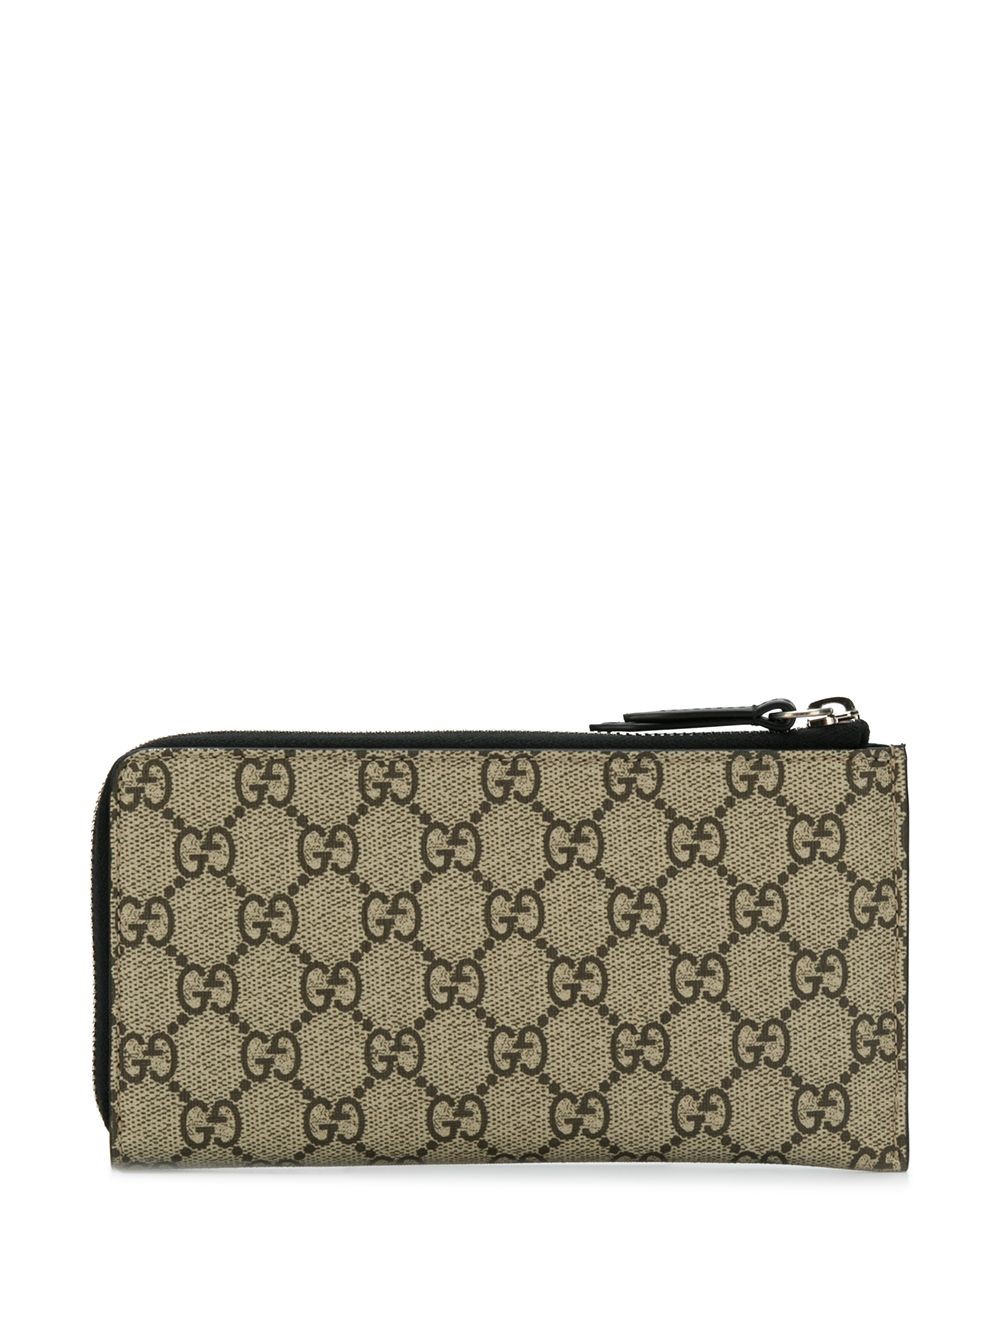 gucci SNAKE WALLET available on www.bagssaleusa.com - 29225